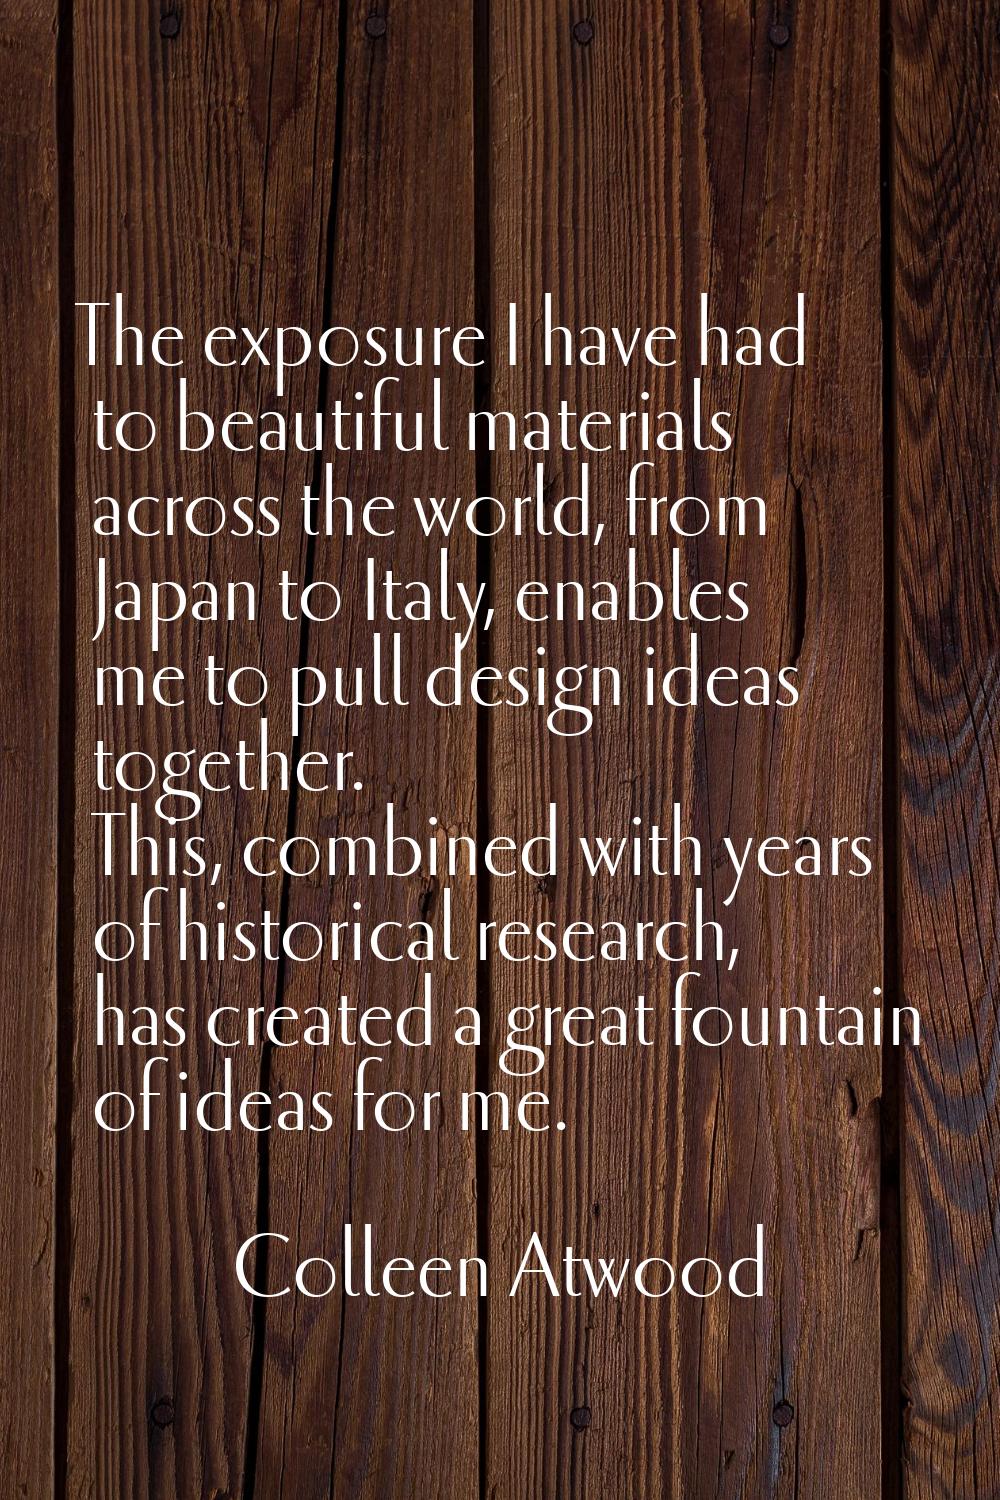 The exposure I have had to beautiful materials across the world, from Japan to Italy, enables me to